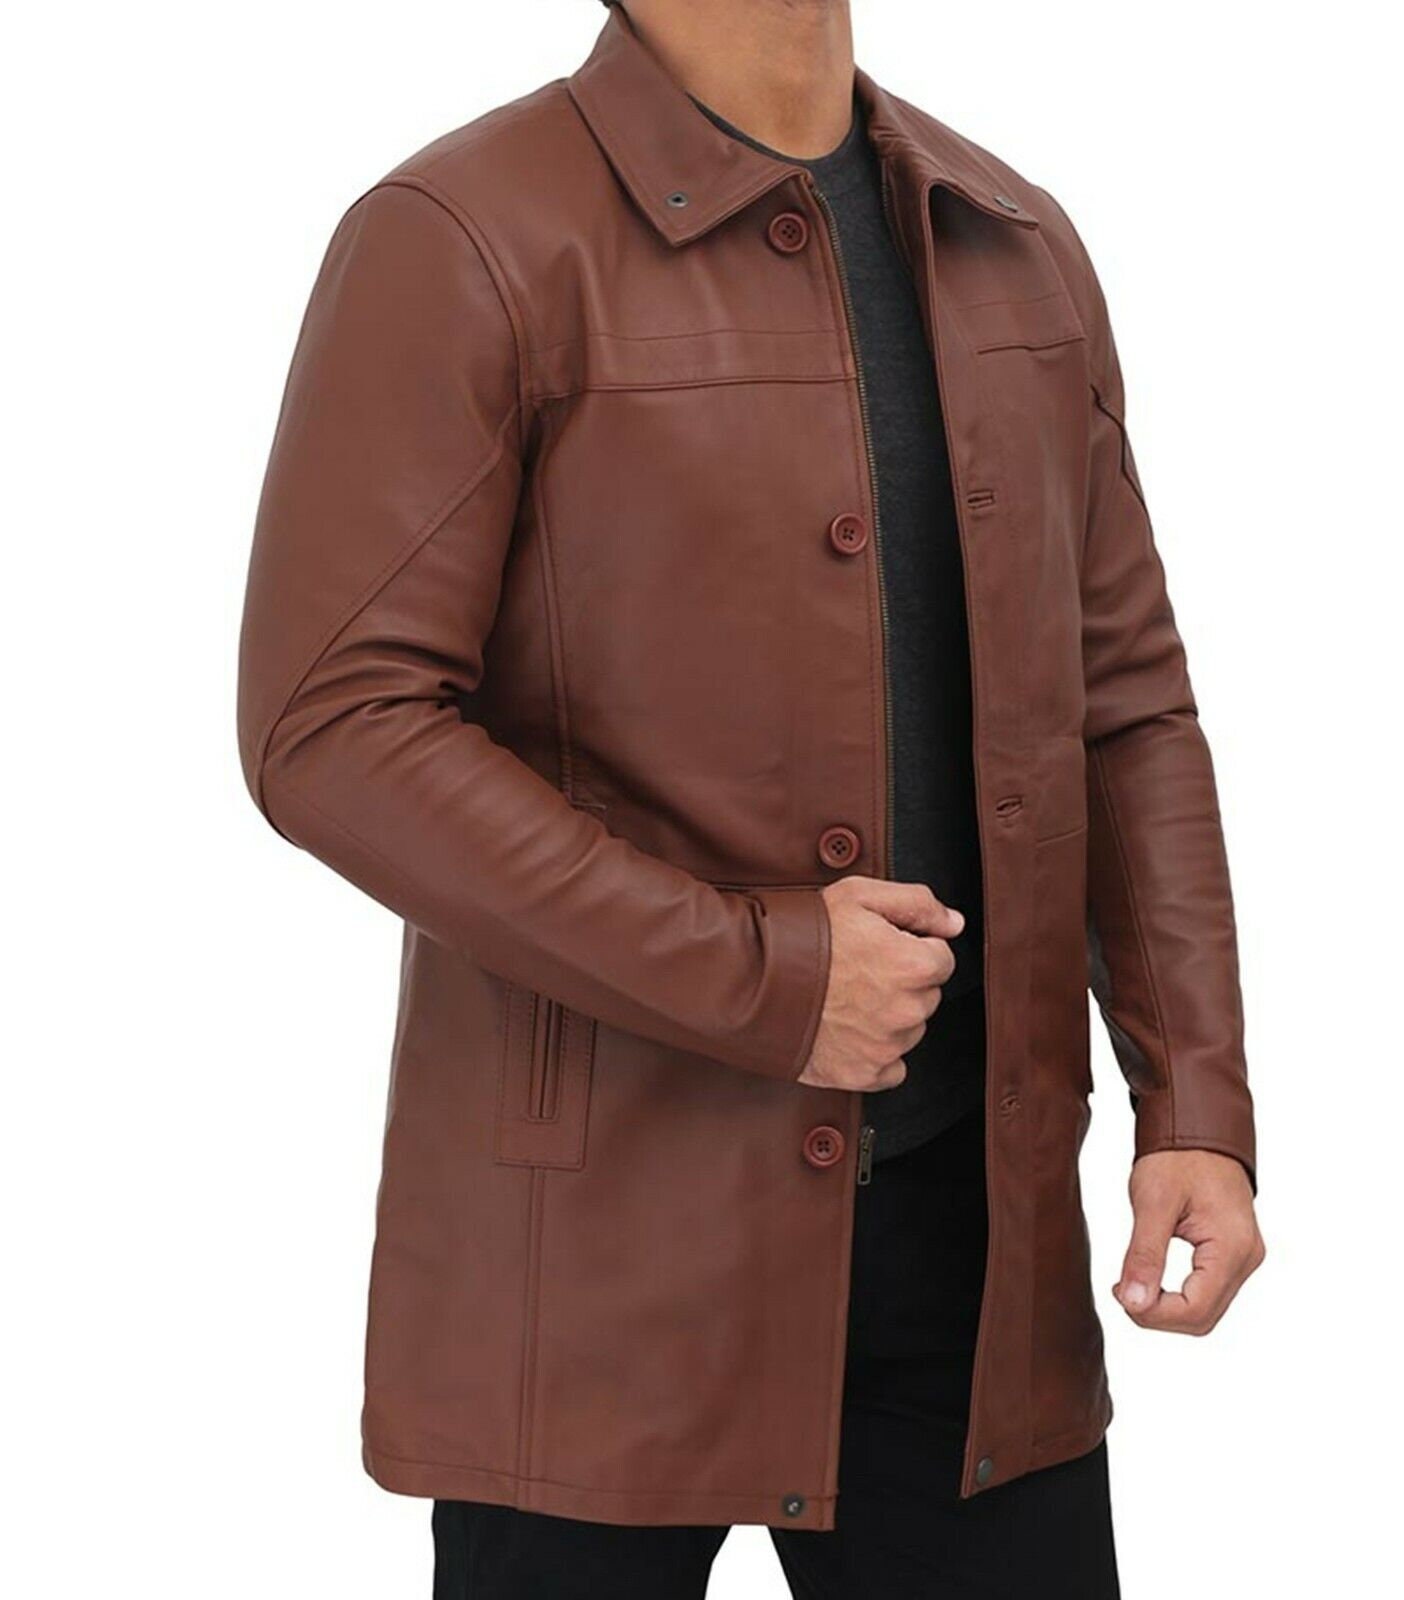 Genuine Leather Jacket, Brown Trench Coat for Men, Gift for Him, Long ...